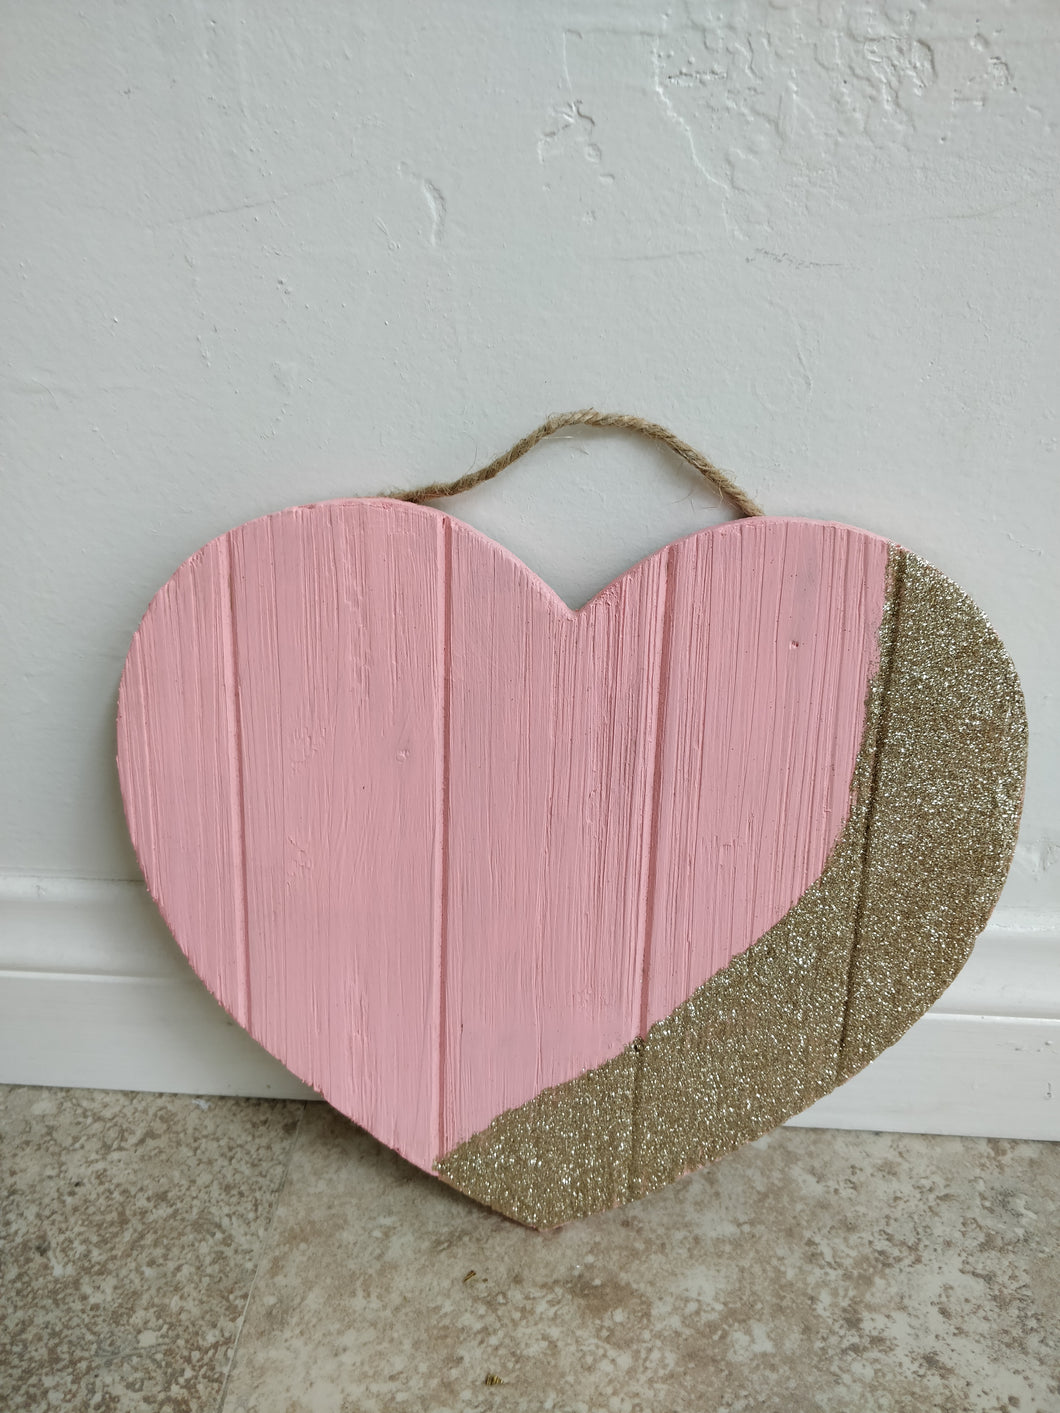 Hand-Painted Wooden Heart Wall Decor – Gordelly, Unlimited